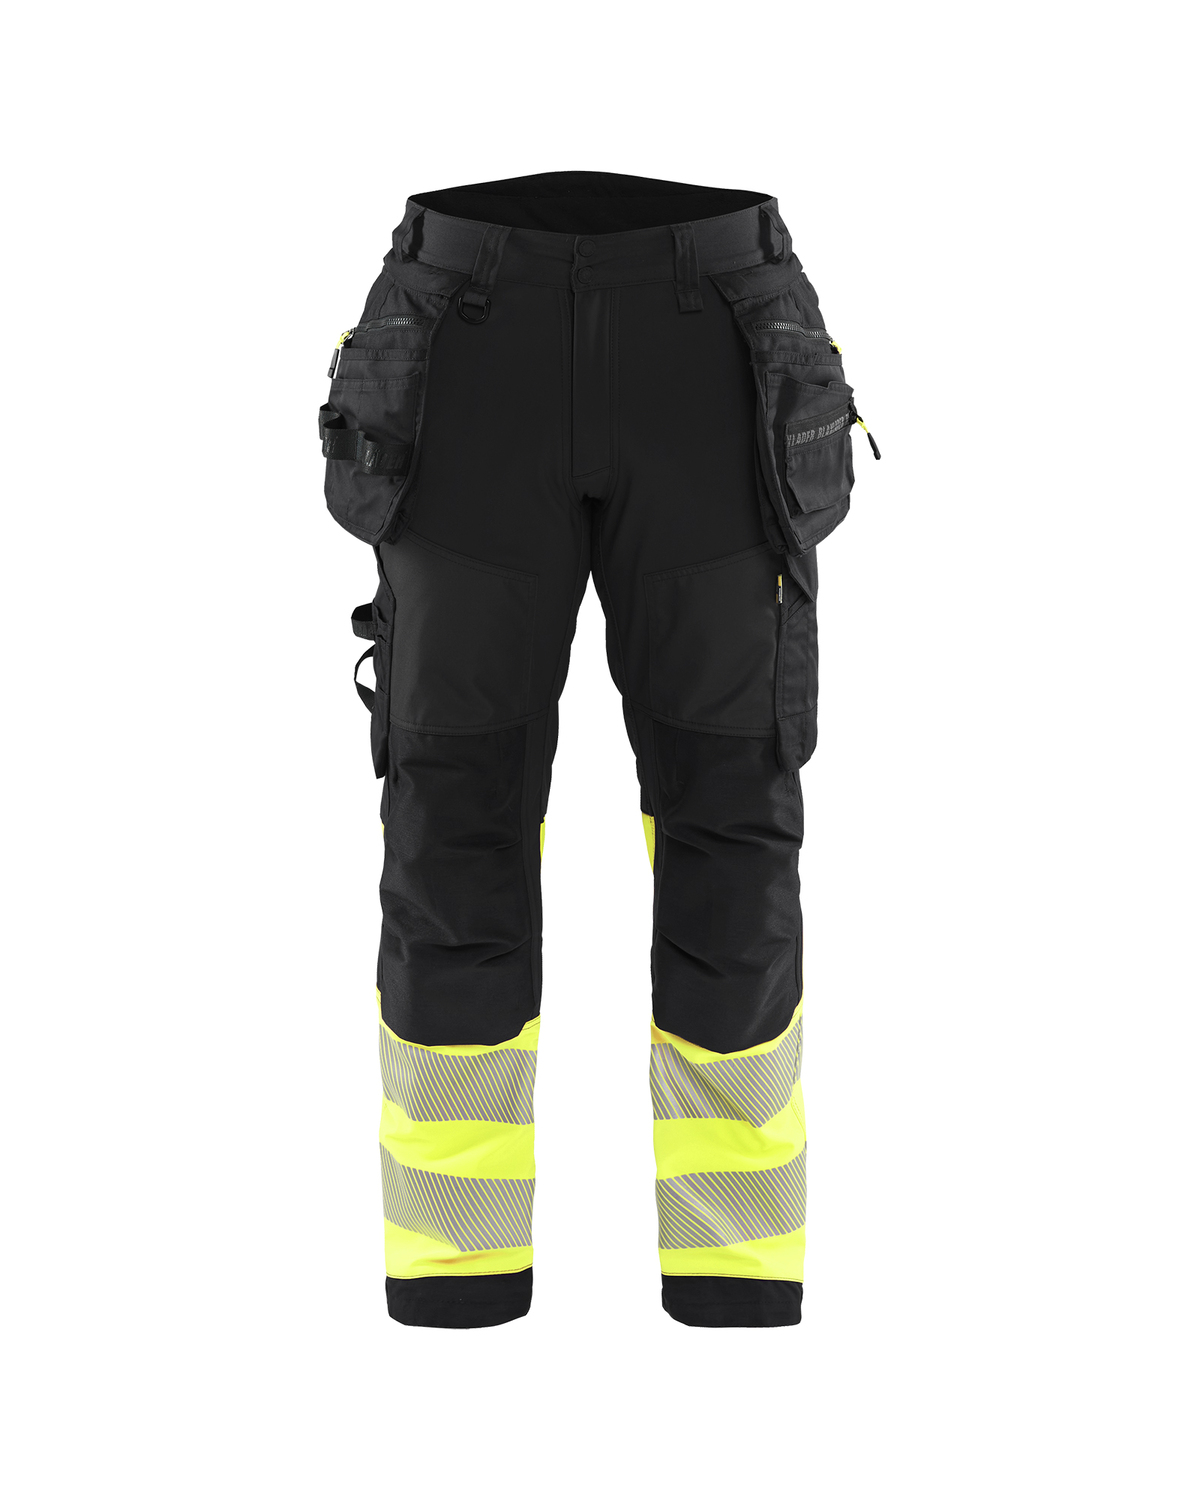 Simon Safety - Portwest TX51 Texo High Visibility Trousers - Size X Small